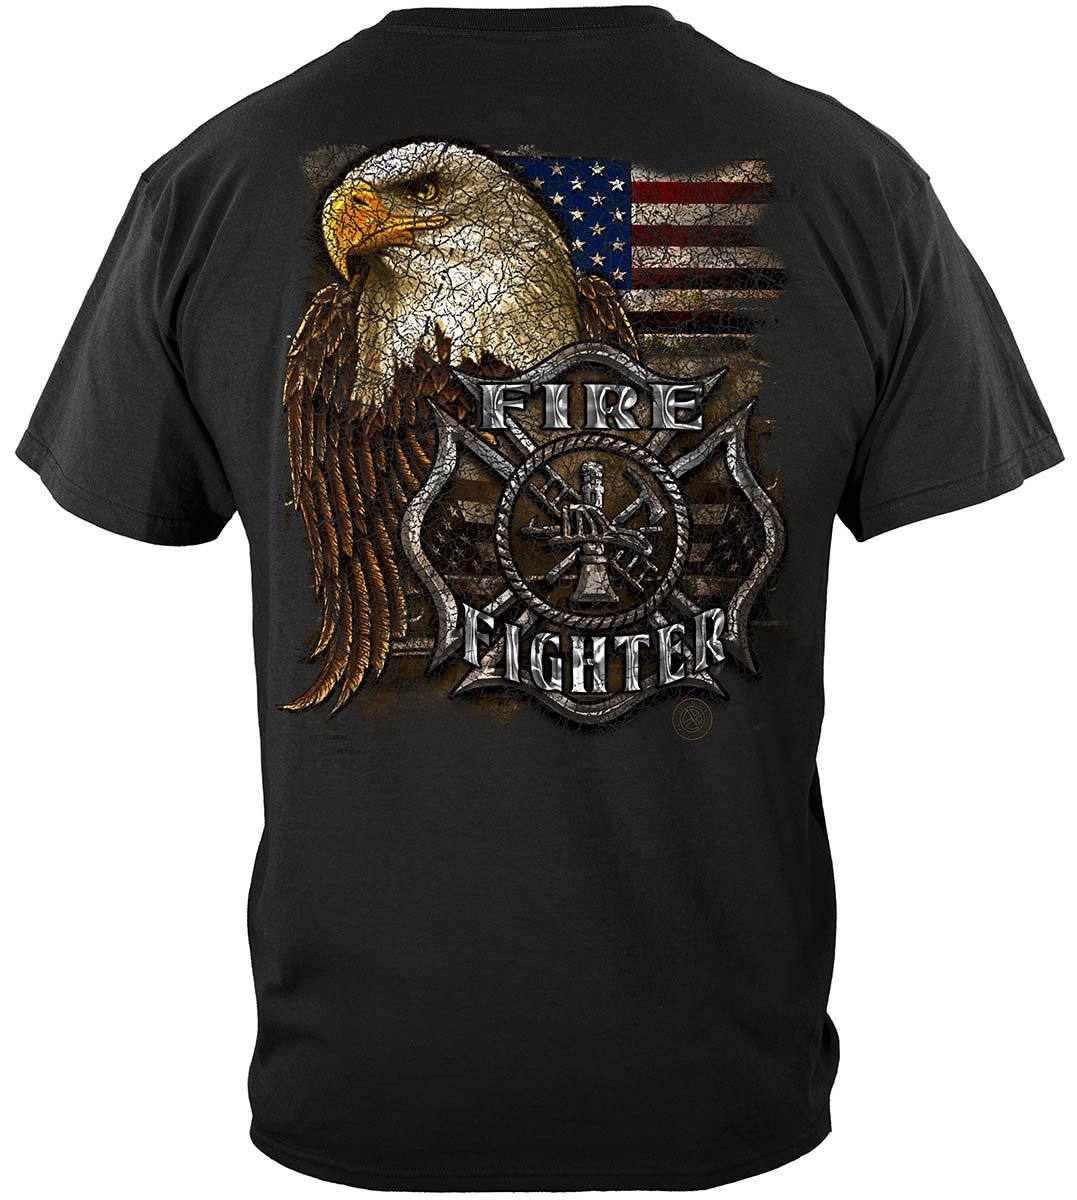 Firefighter Eagle And Flag Premium Long Sleeves